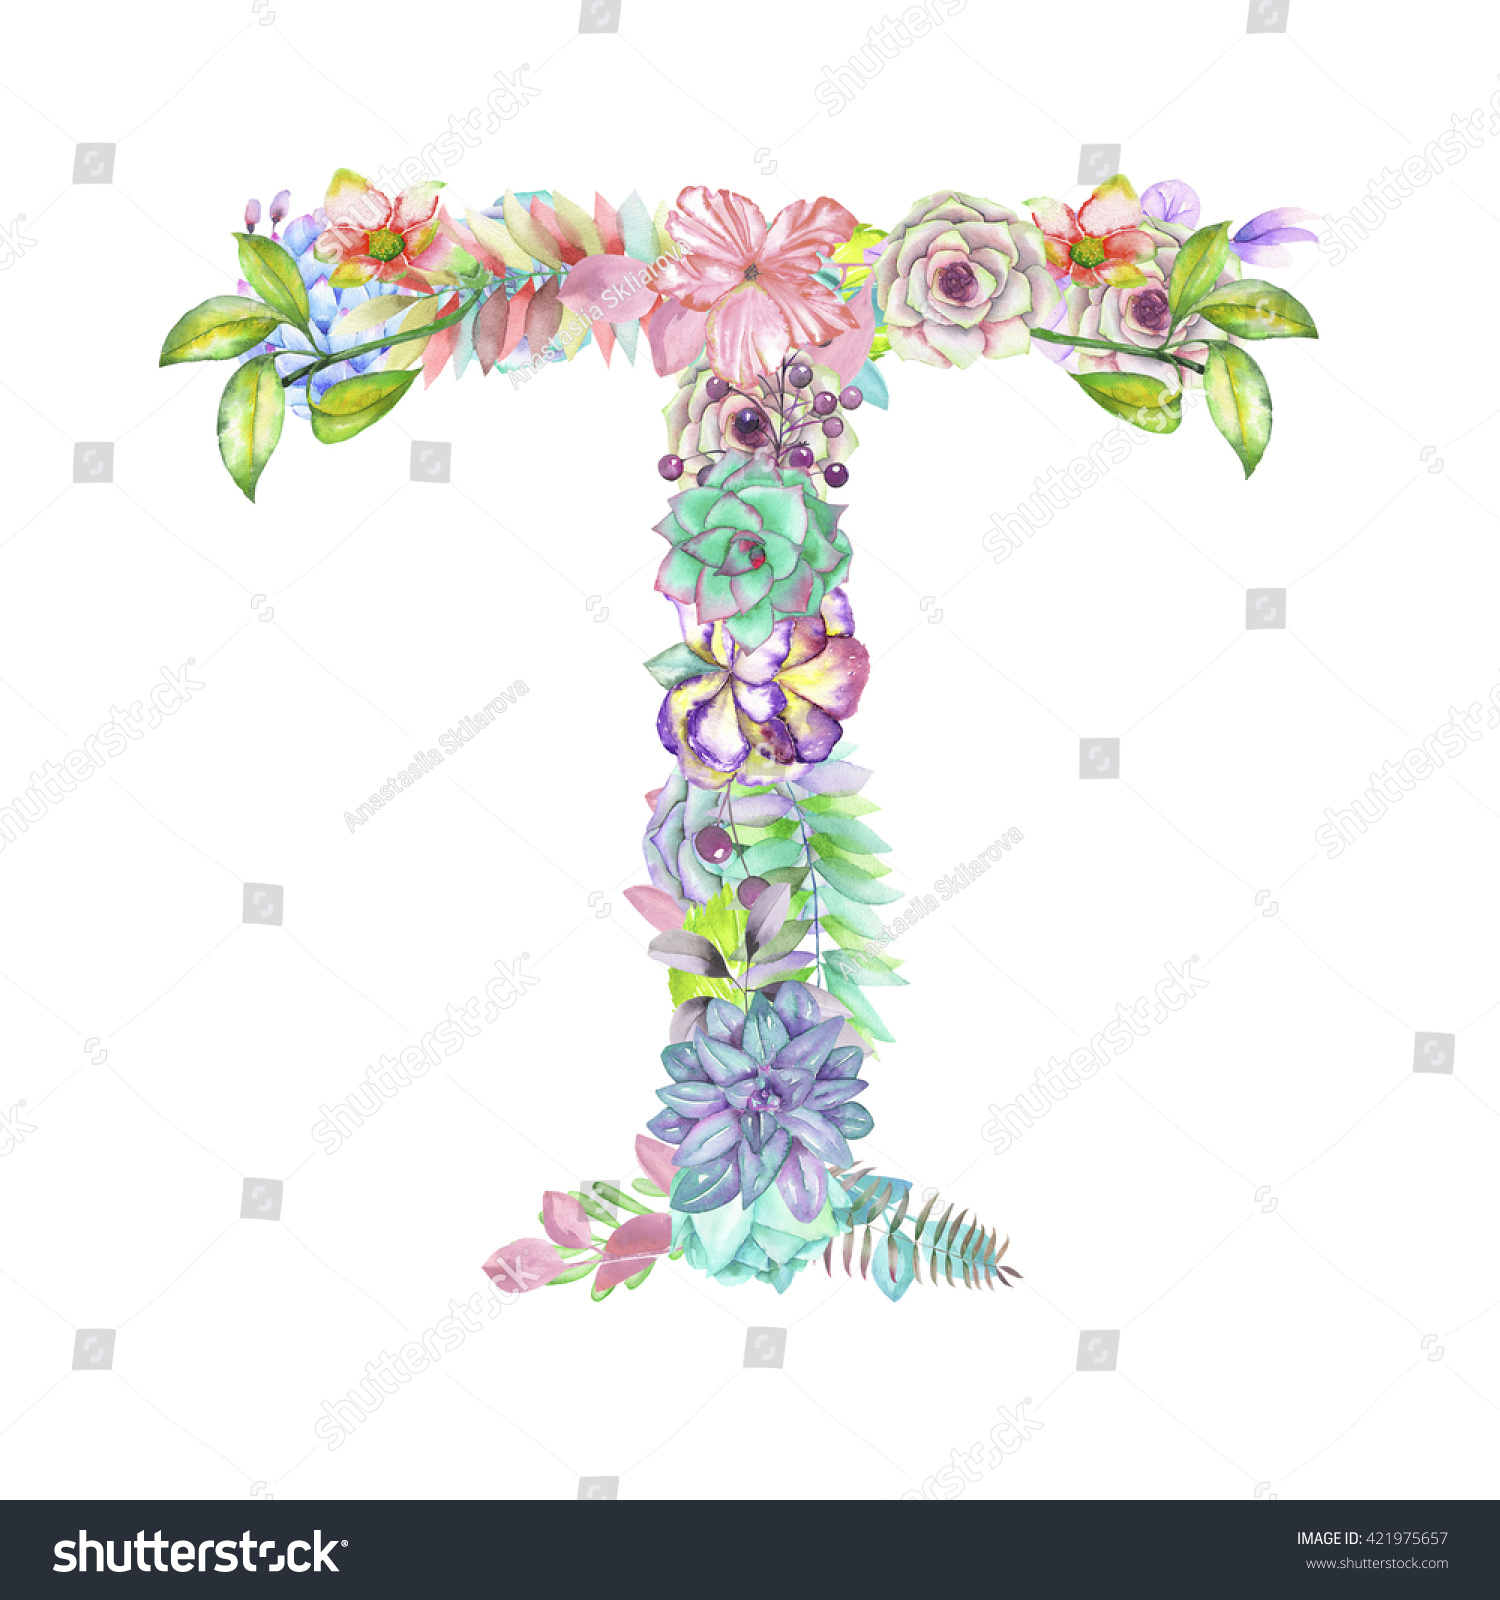 Royalty Free Stock Illustration Of Capital Letter T Watercolor